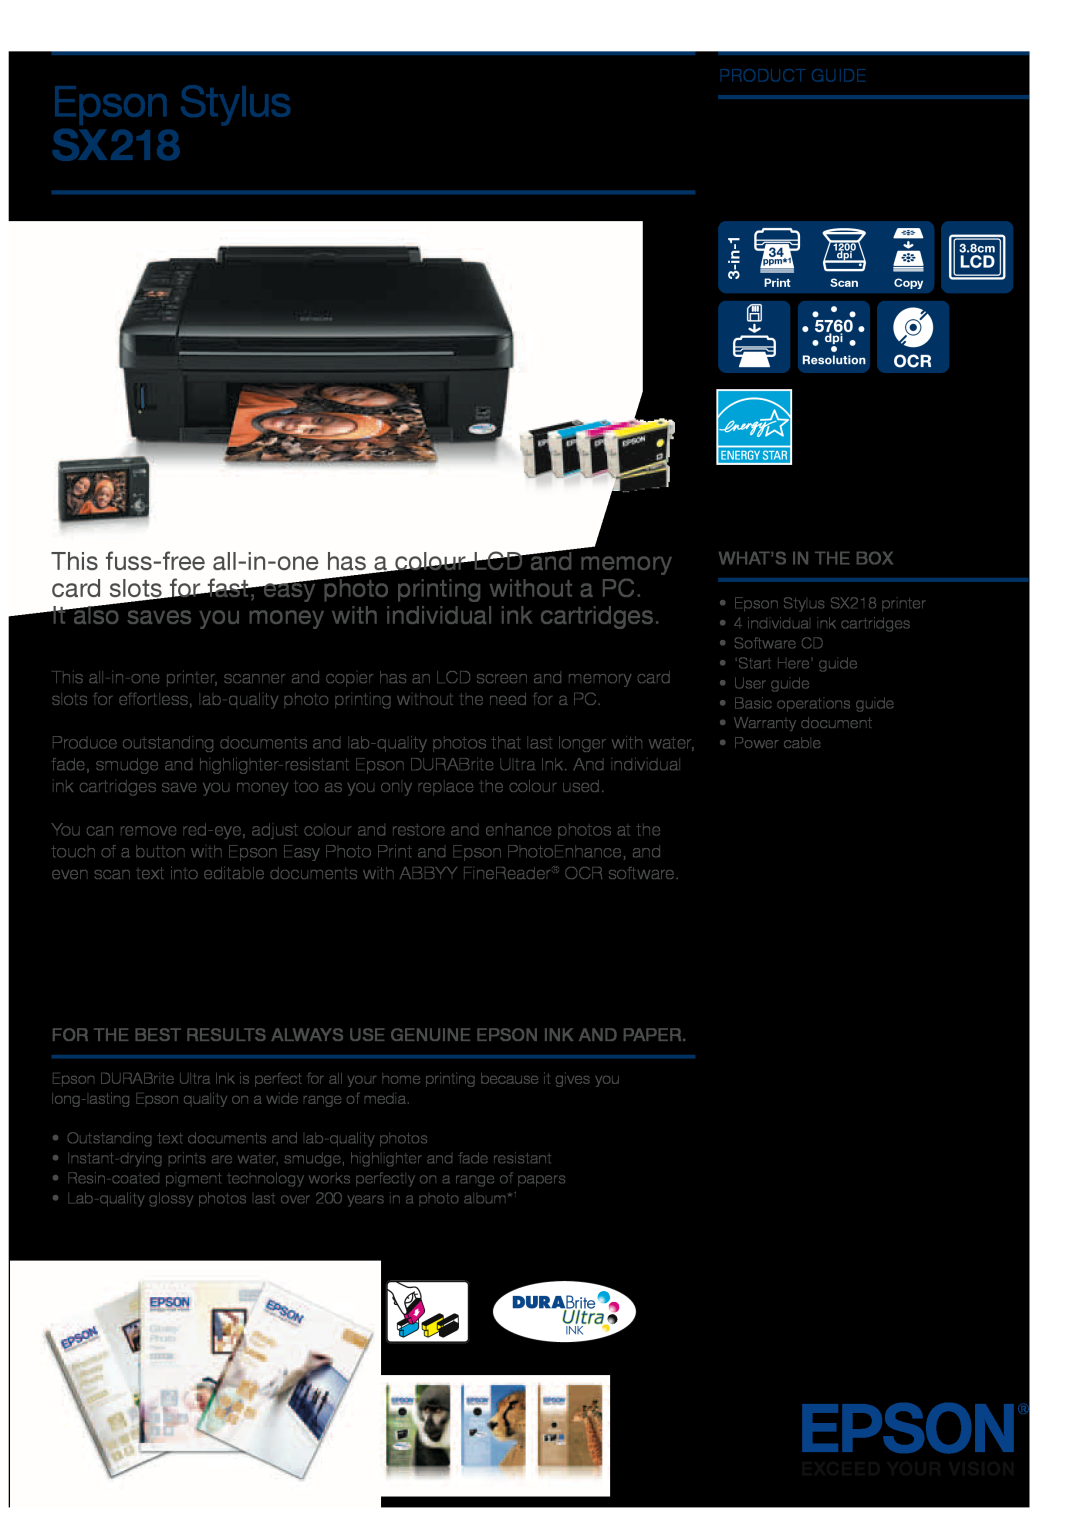 Epson SX218 warranty Product Guide, Epson Stylus, It also saves you money with individual ink cartridges 